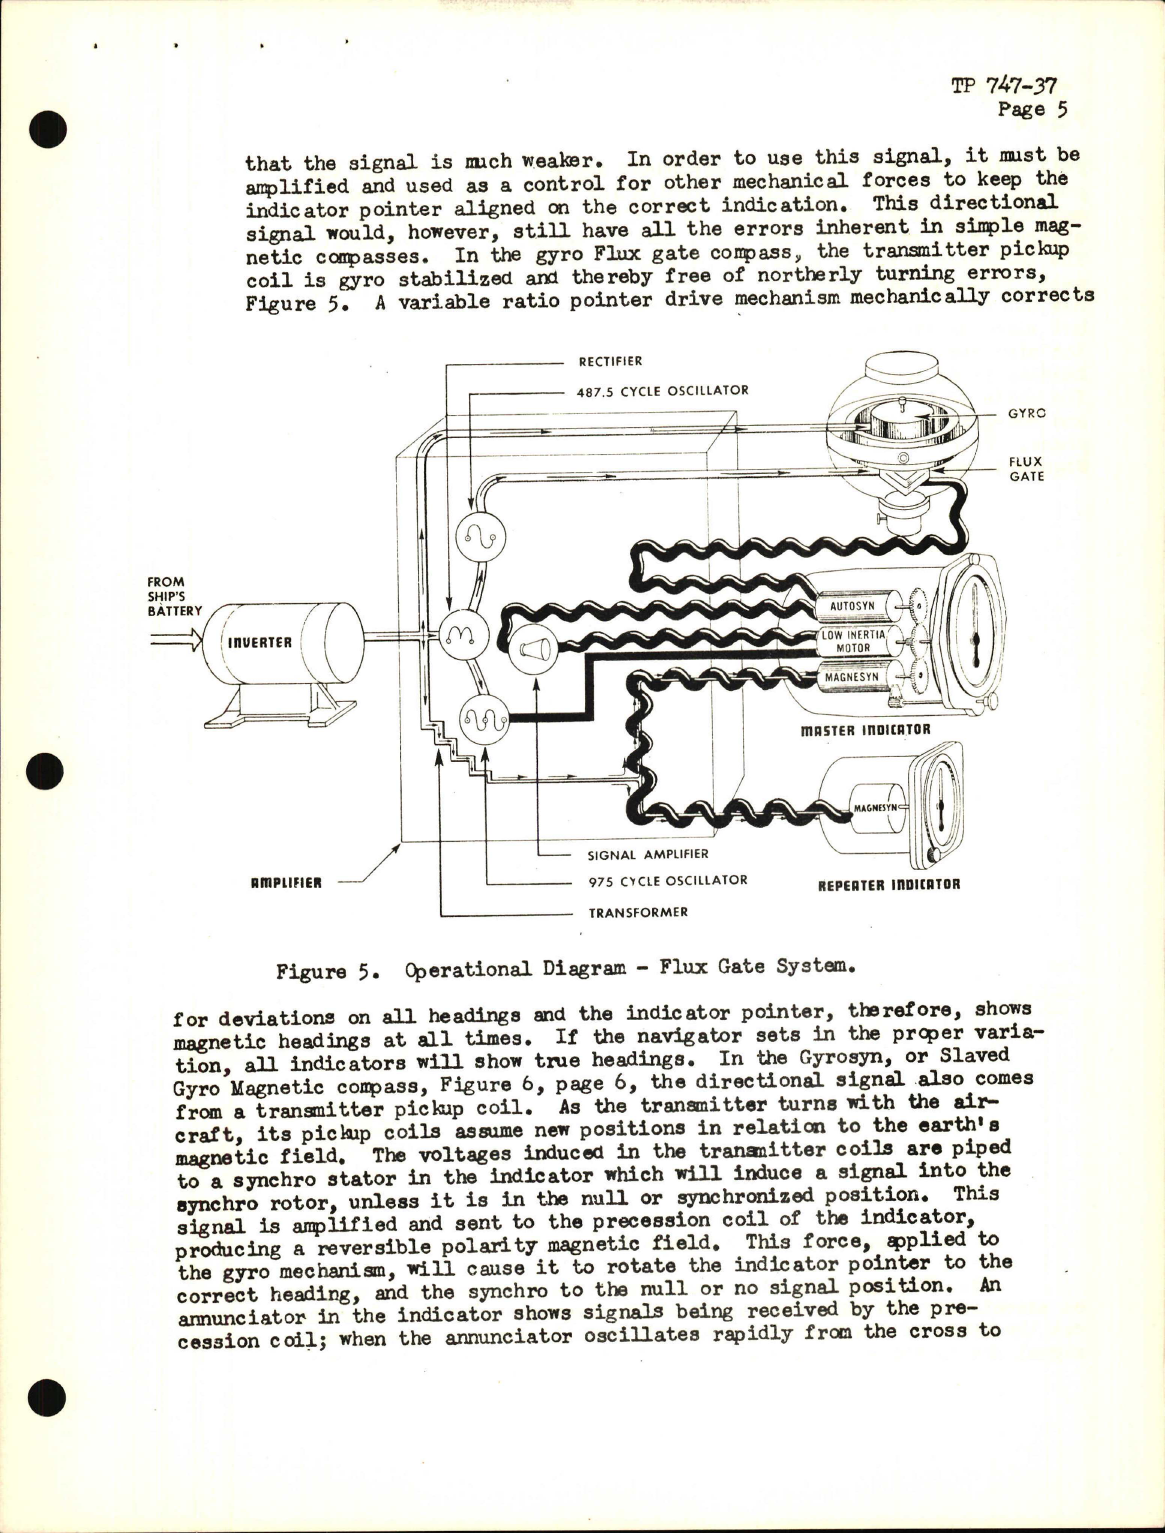 Sample page 5 from AirCorps Library document: Training Project, Electrical and Magnetic Type Instruments (Compasses) 